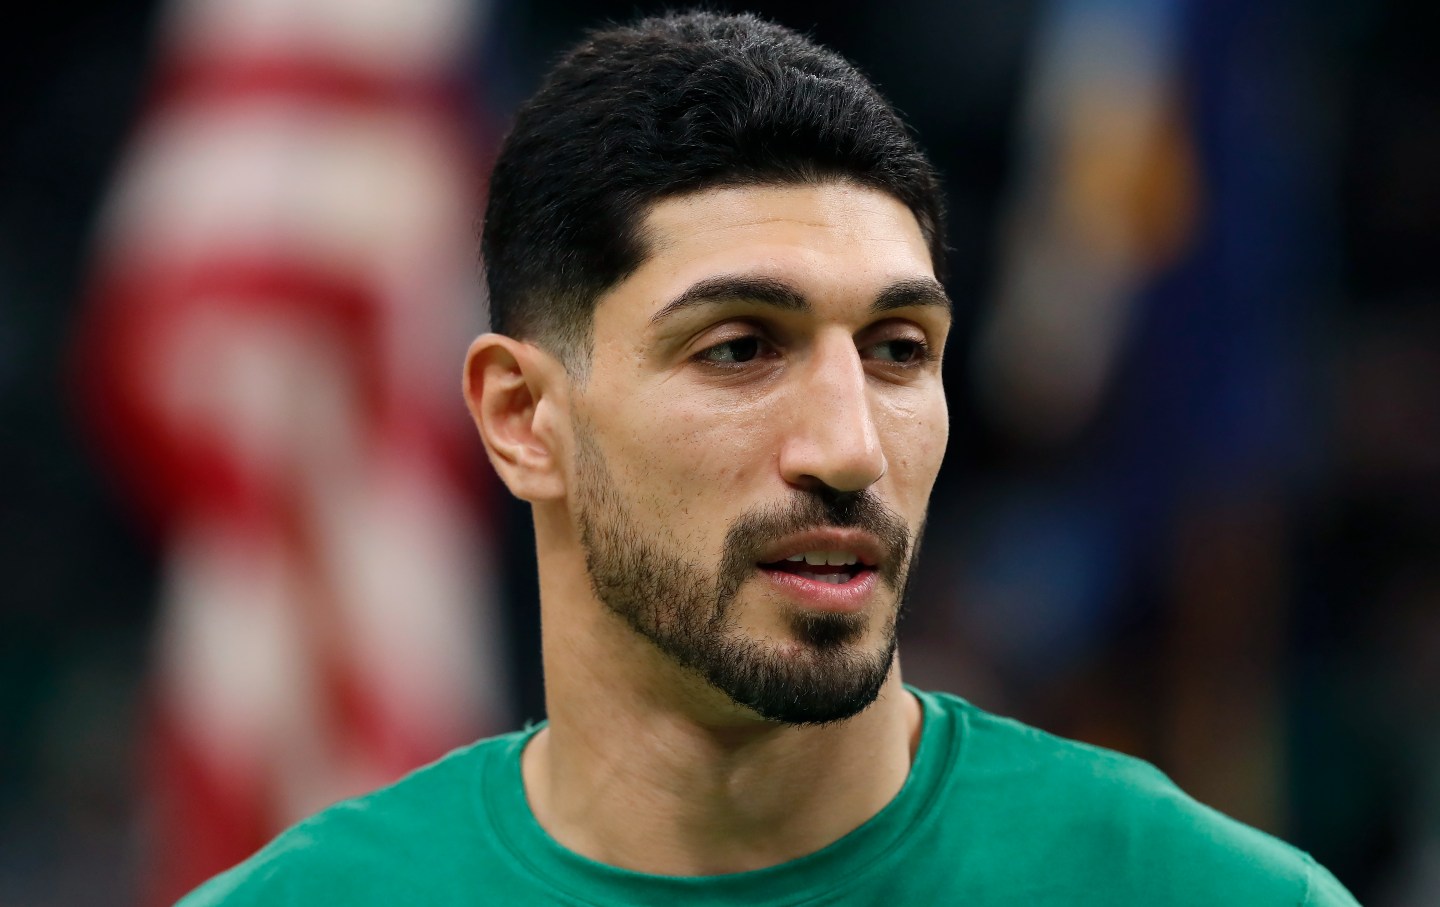 Enes Kanter: Turkish NBA star changes name to 'Freedom' to